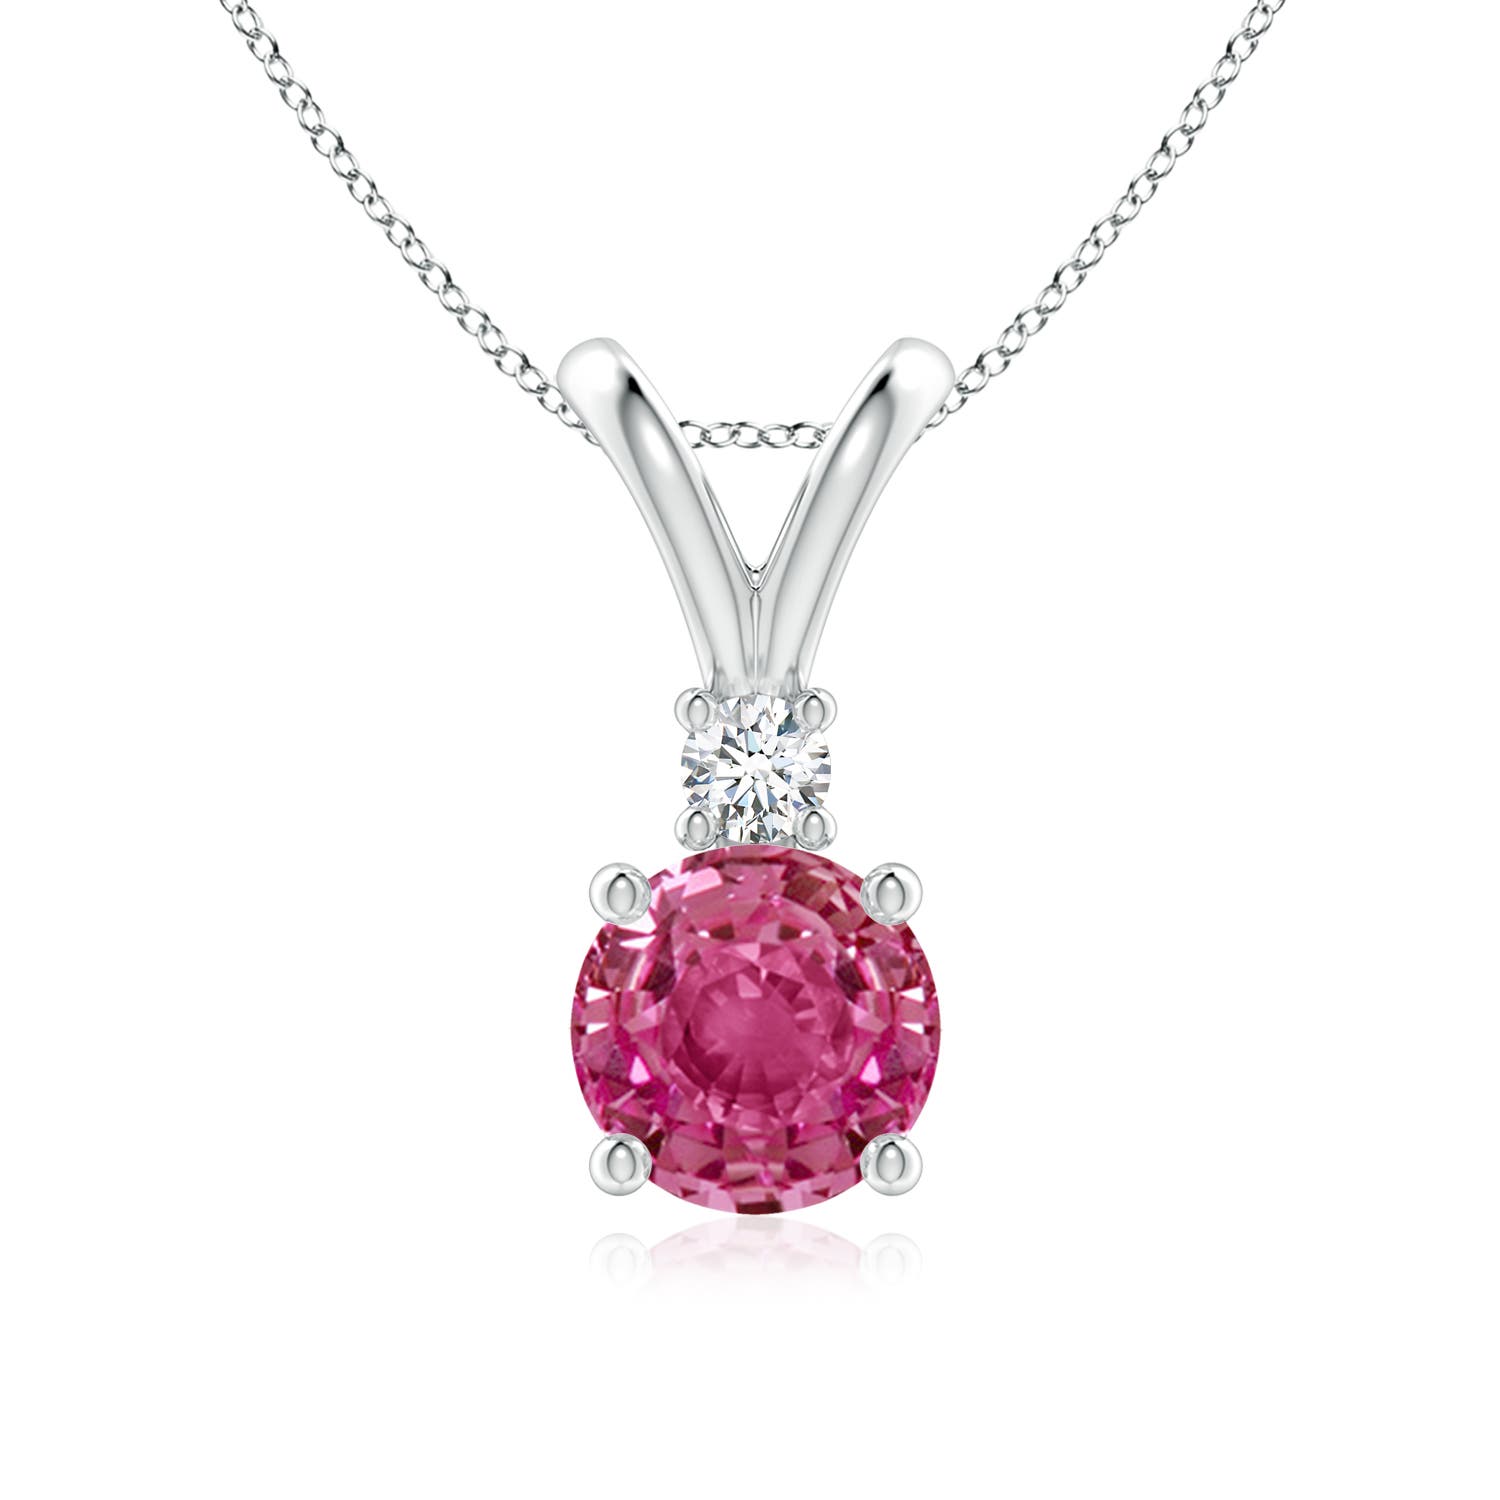 AAAA - Pink Sapphire / 1.67 CT / 14 KT White Gold